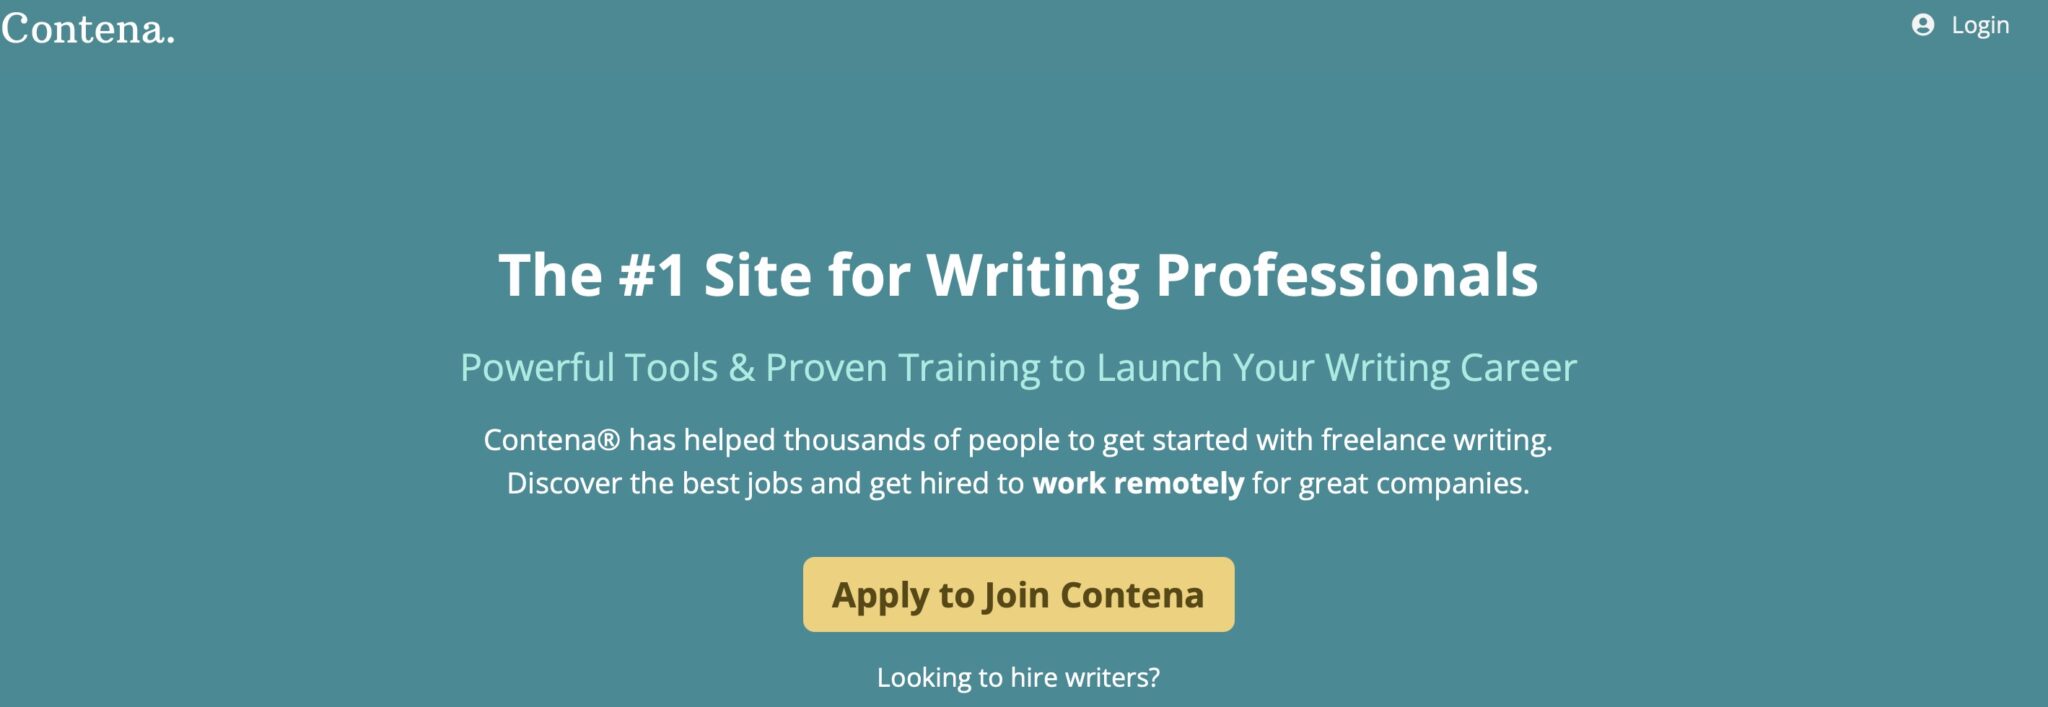 Contena homepage: online writing sites for freelancers